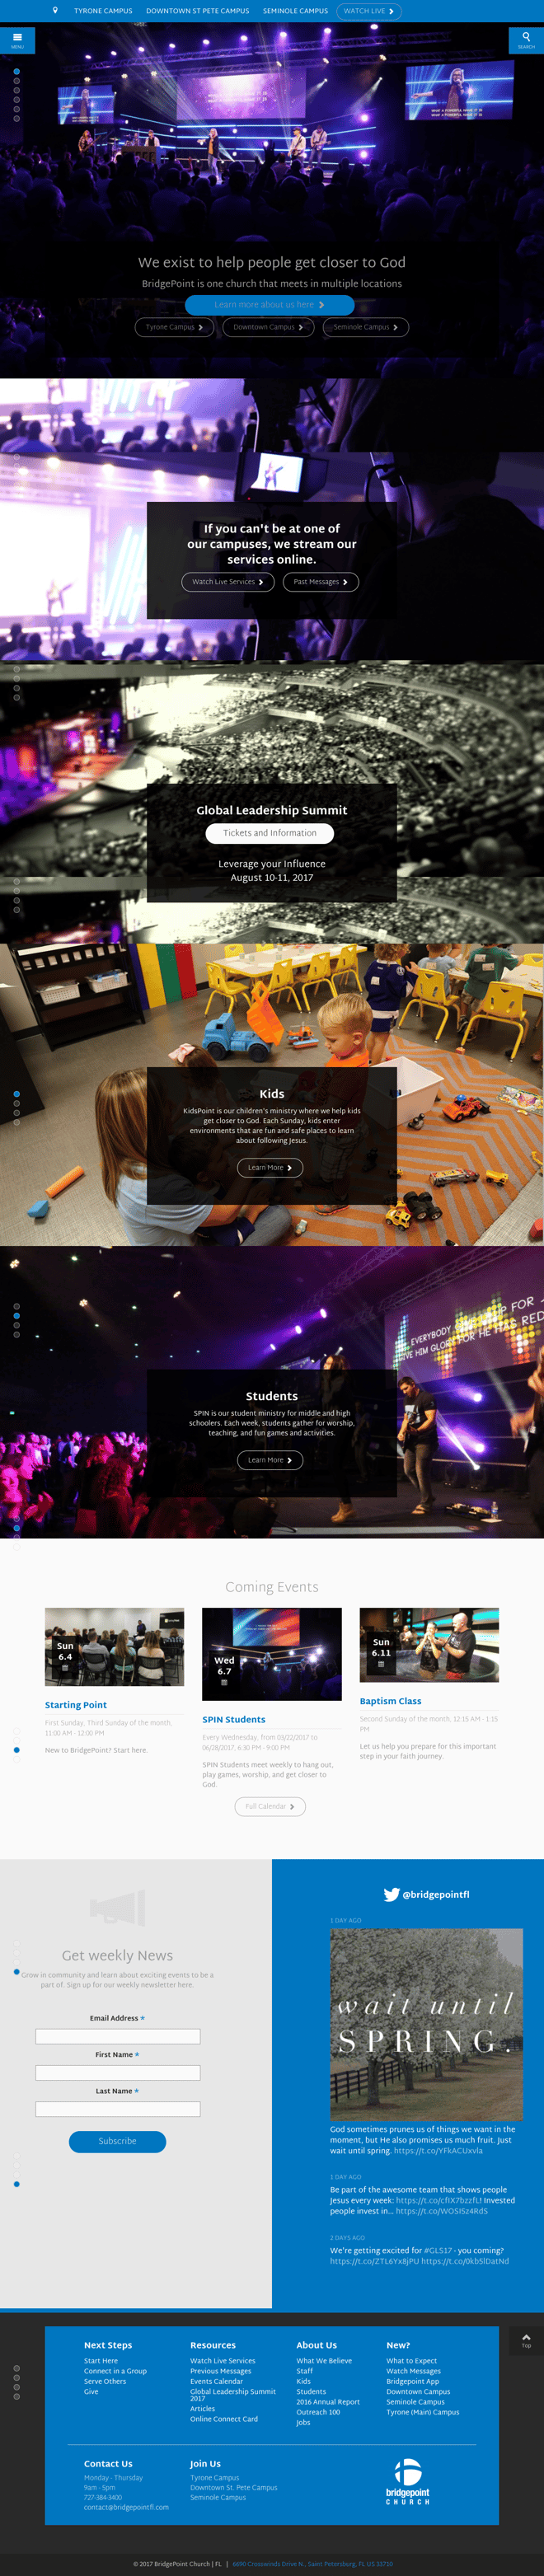 6-awesome-multi-site-church-websites-for-inspiration-bridgepoint.png